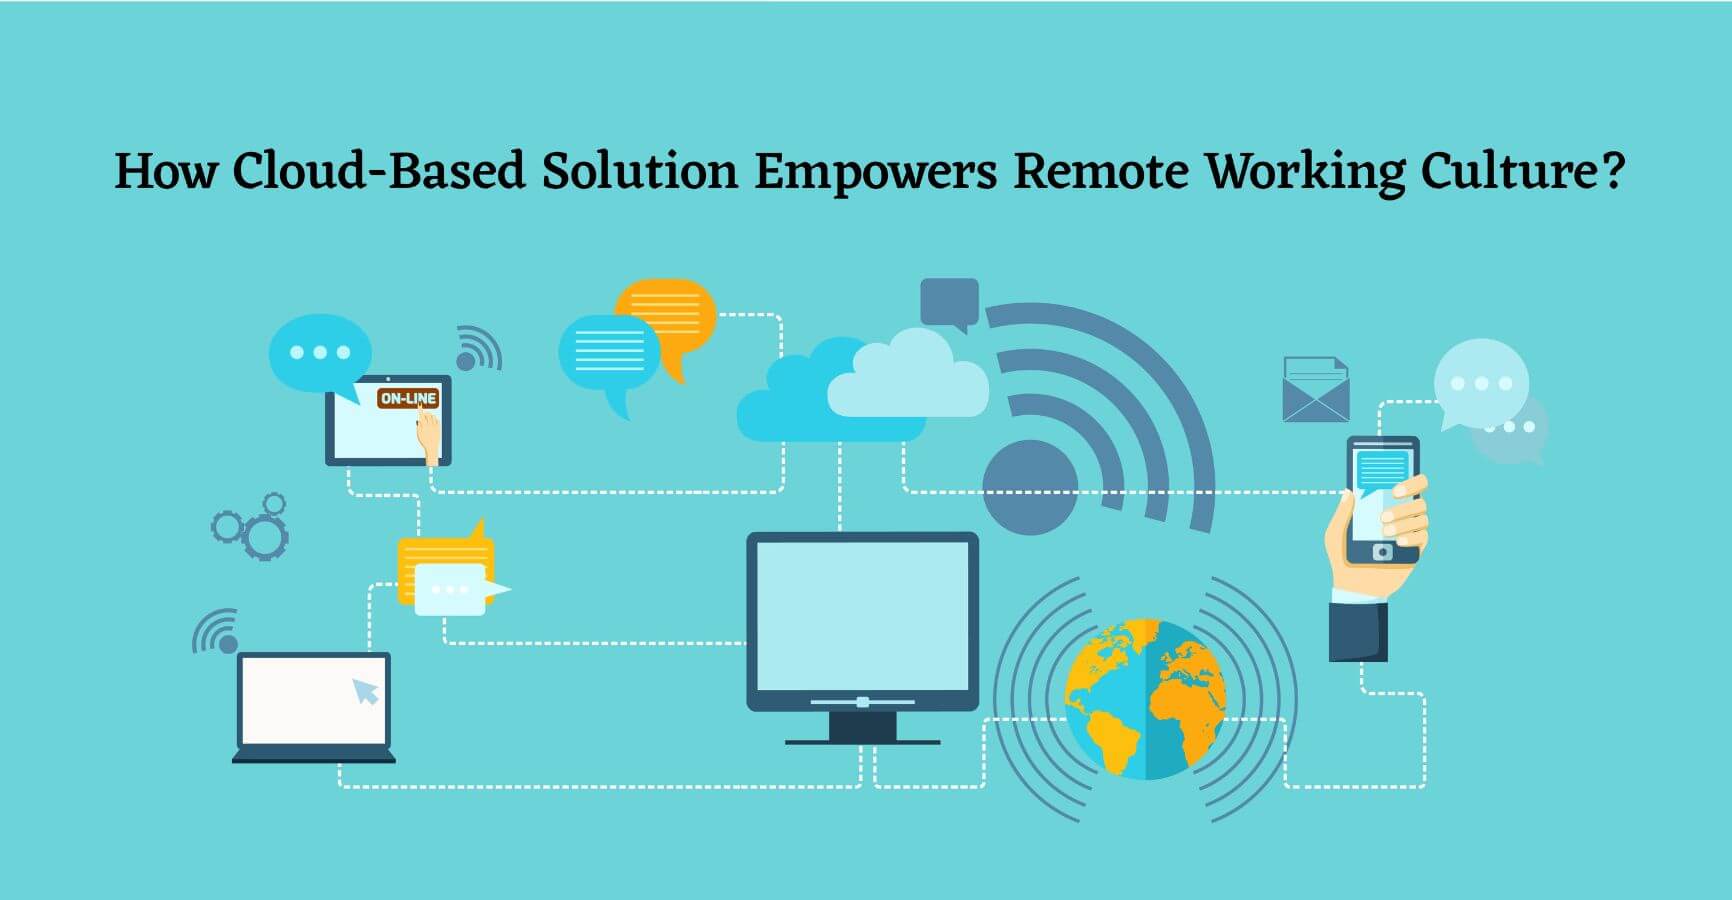 How Cloud-Based Solutions Empower Remote Working Culture?